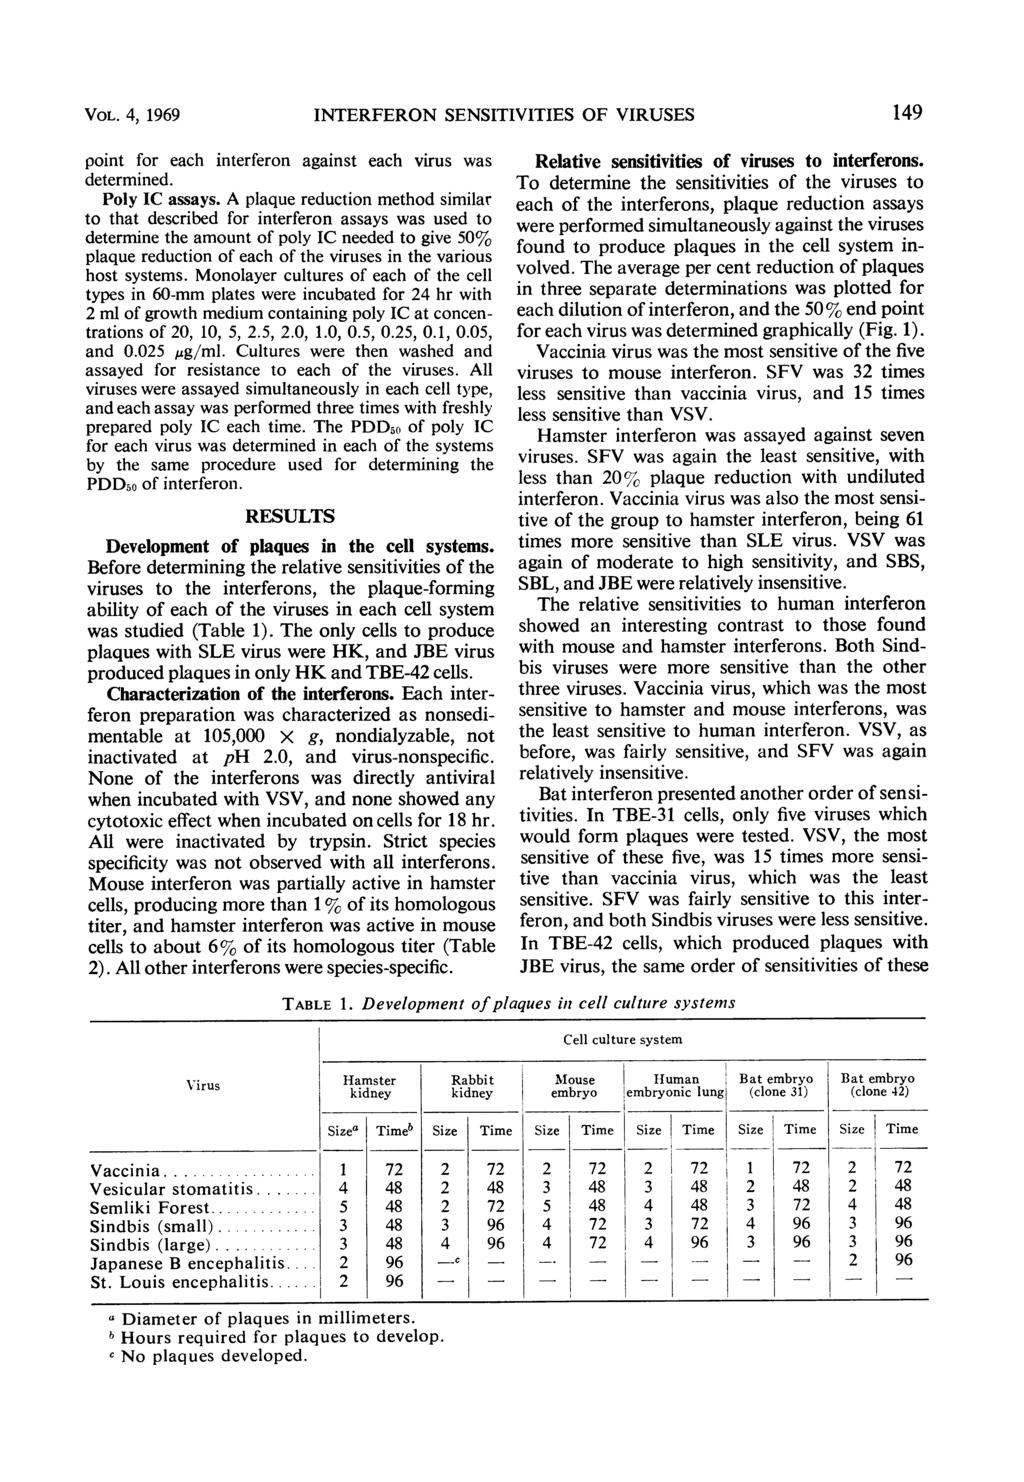 VOL. 4, 1969 INTERFERON SENSITIVITIES OF VIRUSES 149 point for each interferon against each virus was determined. Poly IC assays.